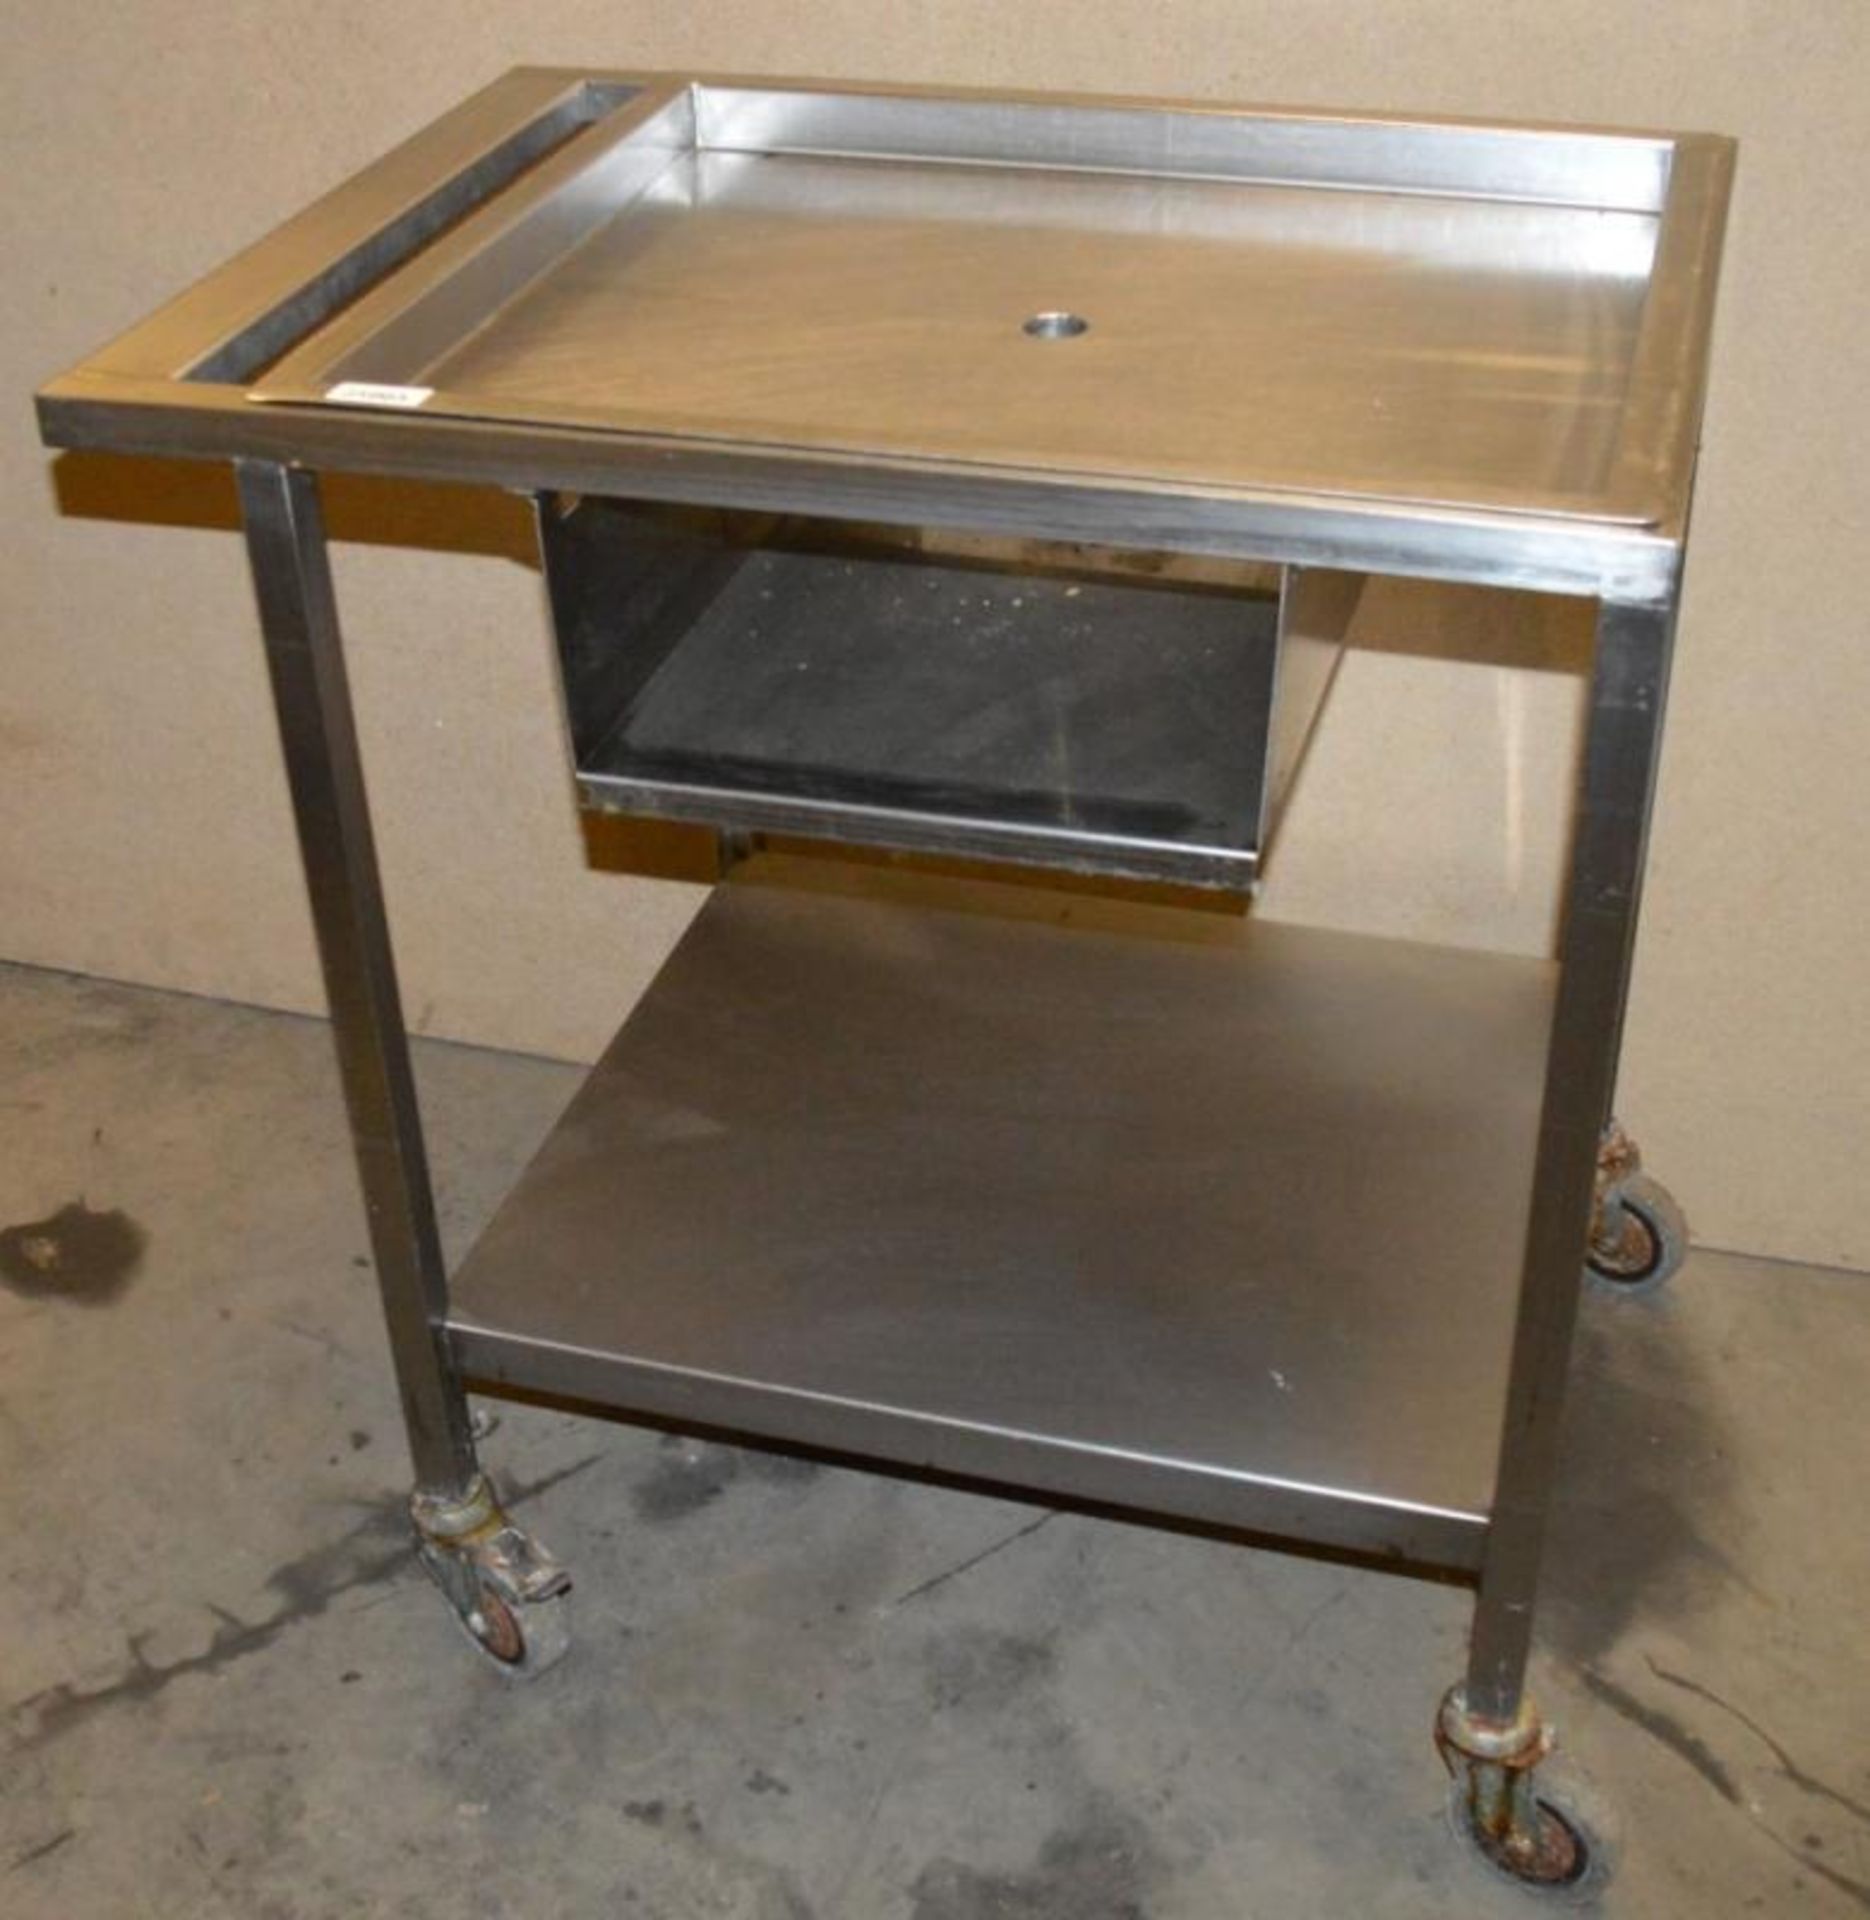 1 x Wheeled Stainless Steel Prep Bench with Drain Hole - Dimensions: 81.5 x 60.5 x 88cm - Ref: J1003 - Image 4 of 4